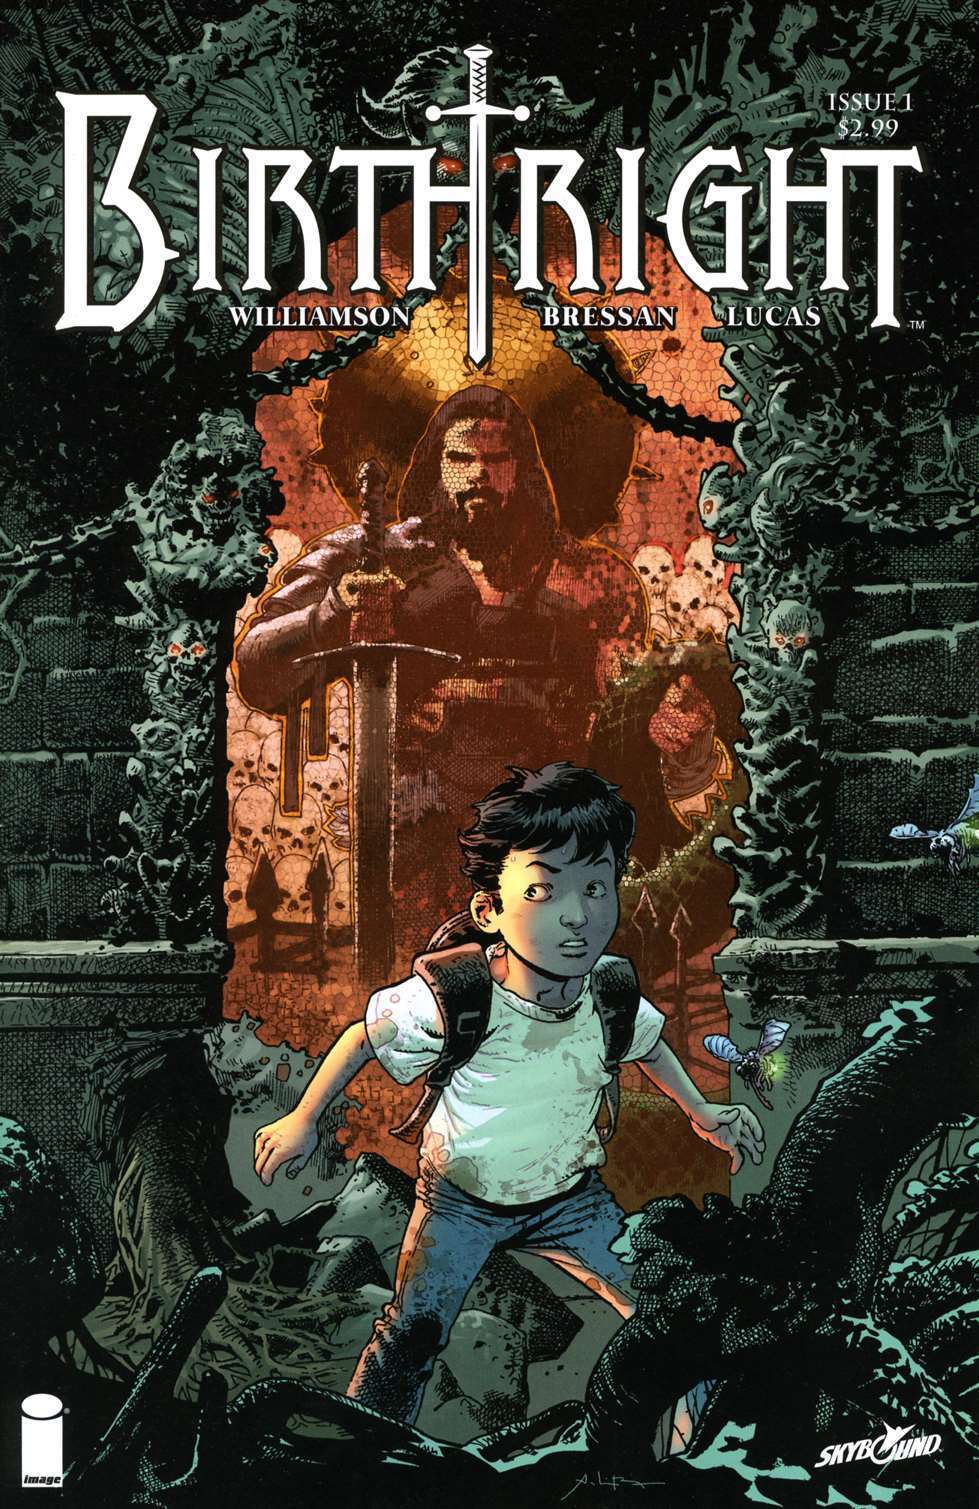 Birthright (Image) #1A VF/NM; Image | Skybound - we combine shipping